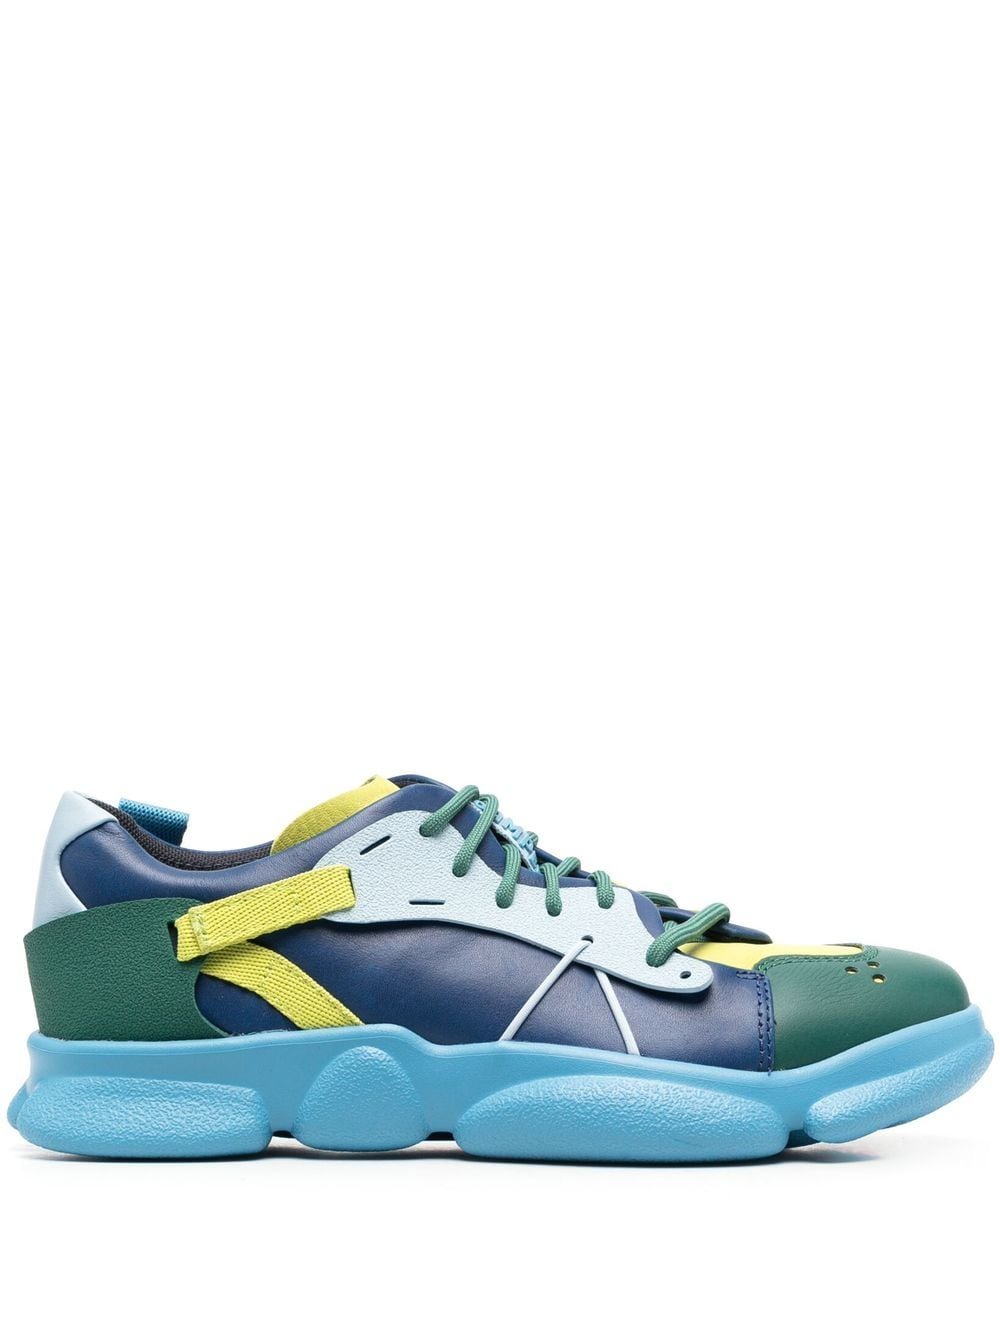 Karst Multicolor Sneakers for Men - Autumn/Winter collection - Camper USA